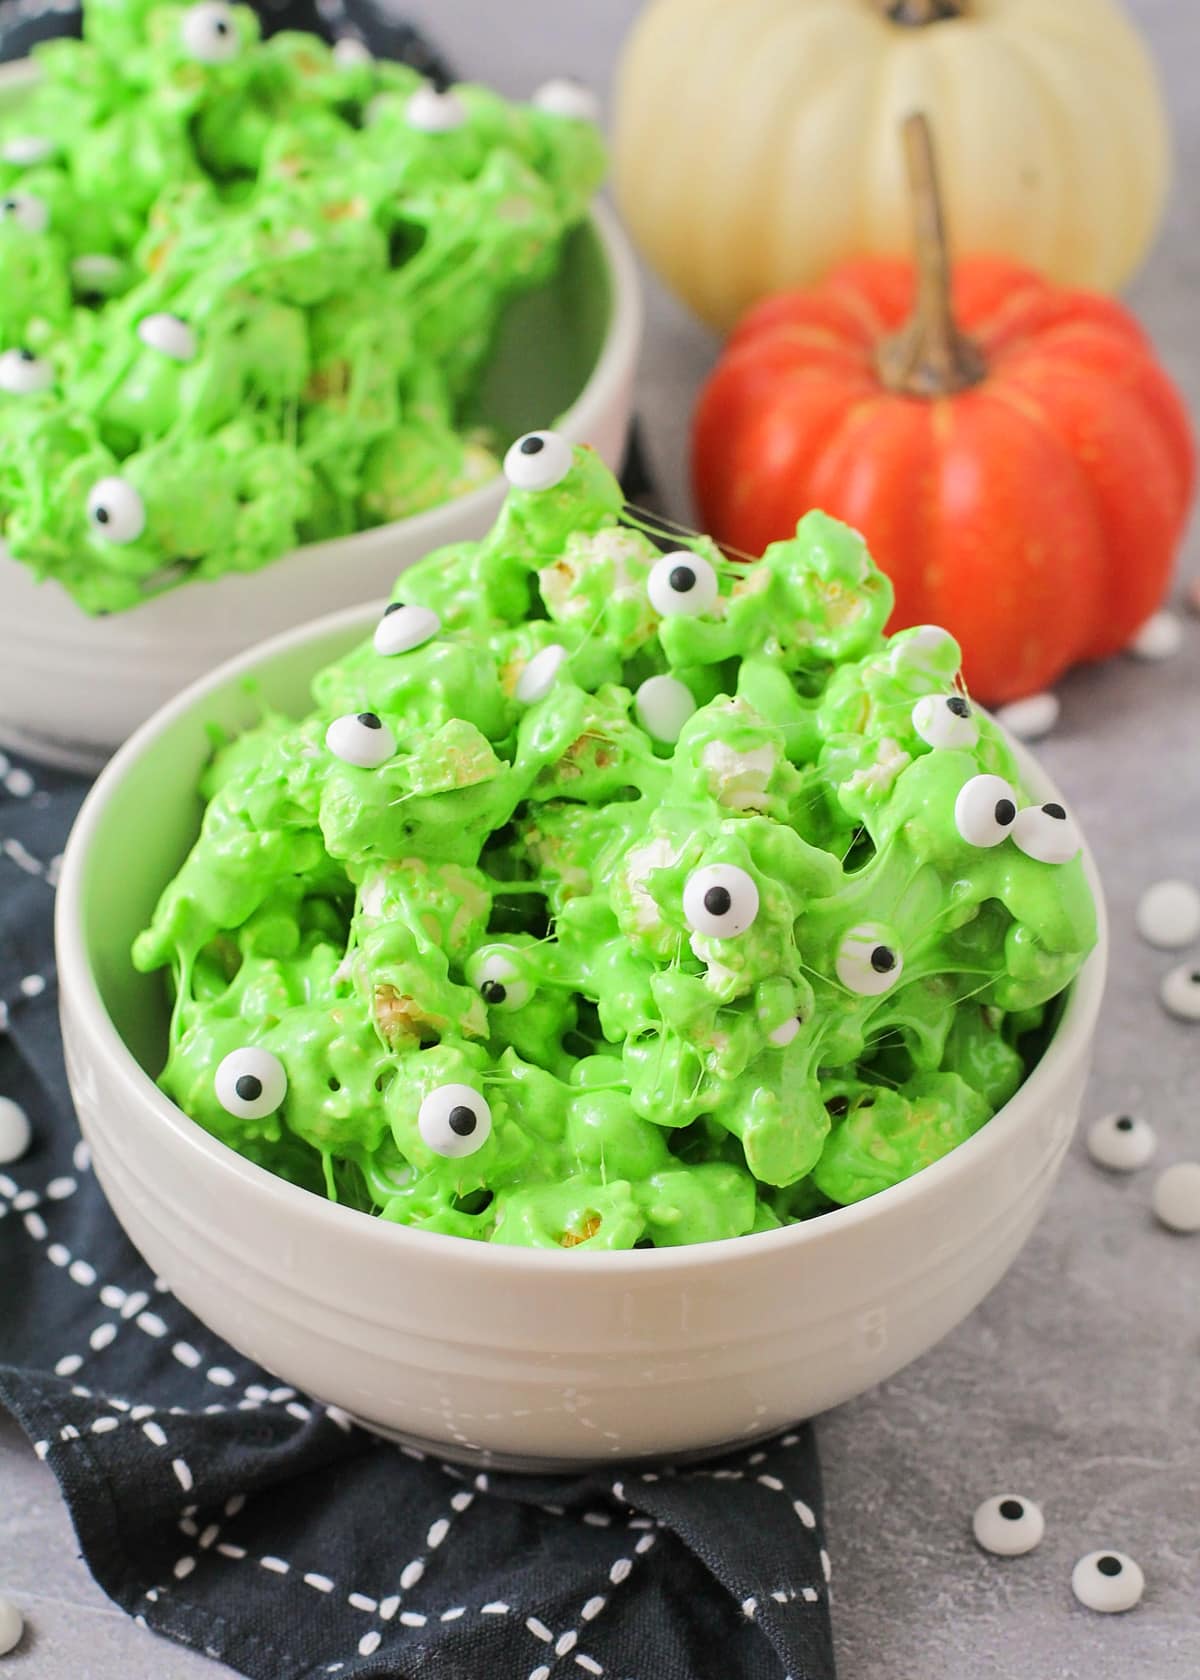 A white bowl filled with green slime popcorn covered in candy eyeballs.